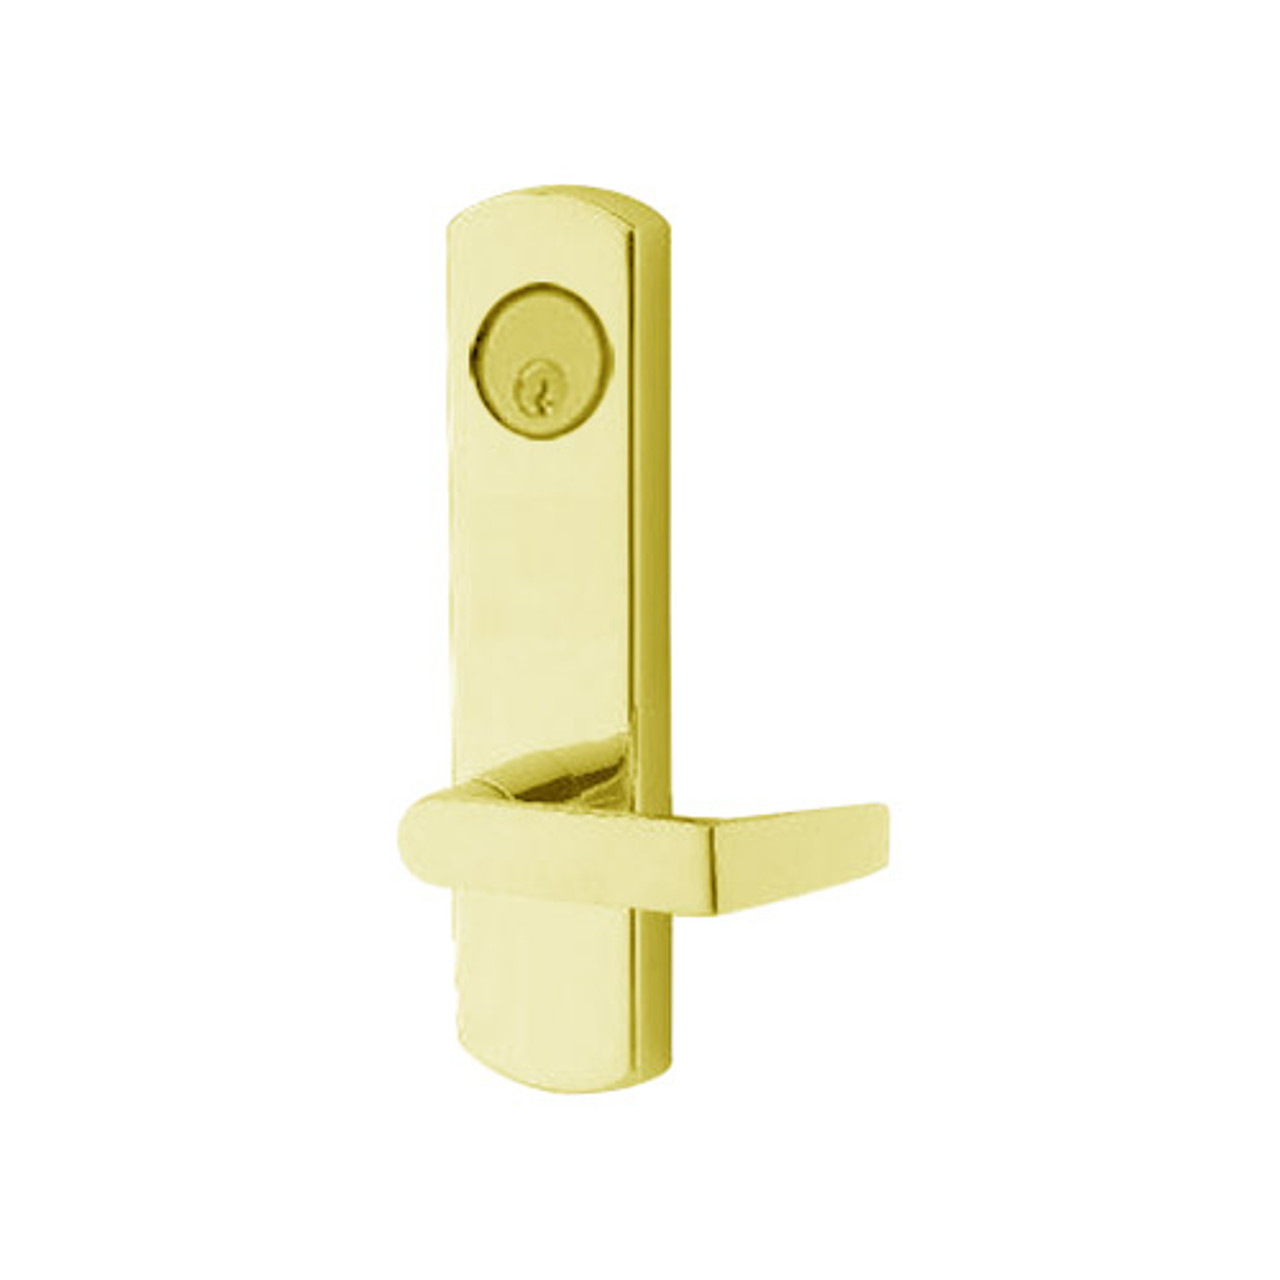 3080E-03-0-31-30 US3 Adams Rite Electrified Entry Trim with Square Lever in Bright Brass Finish